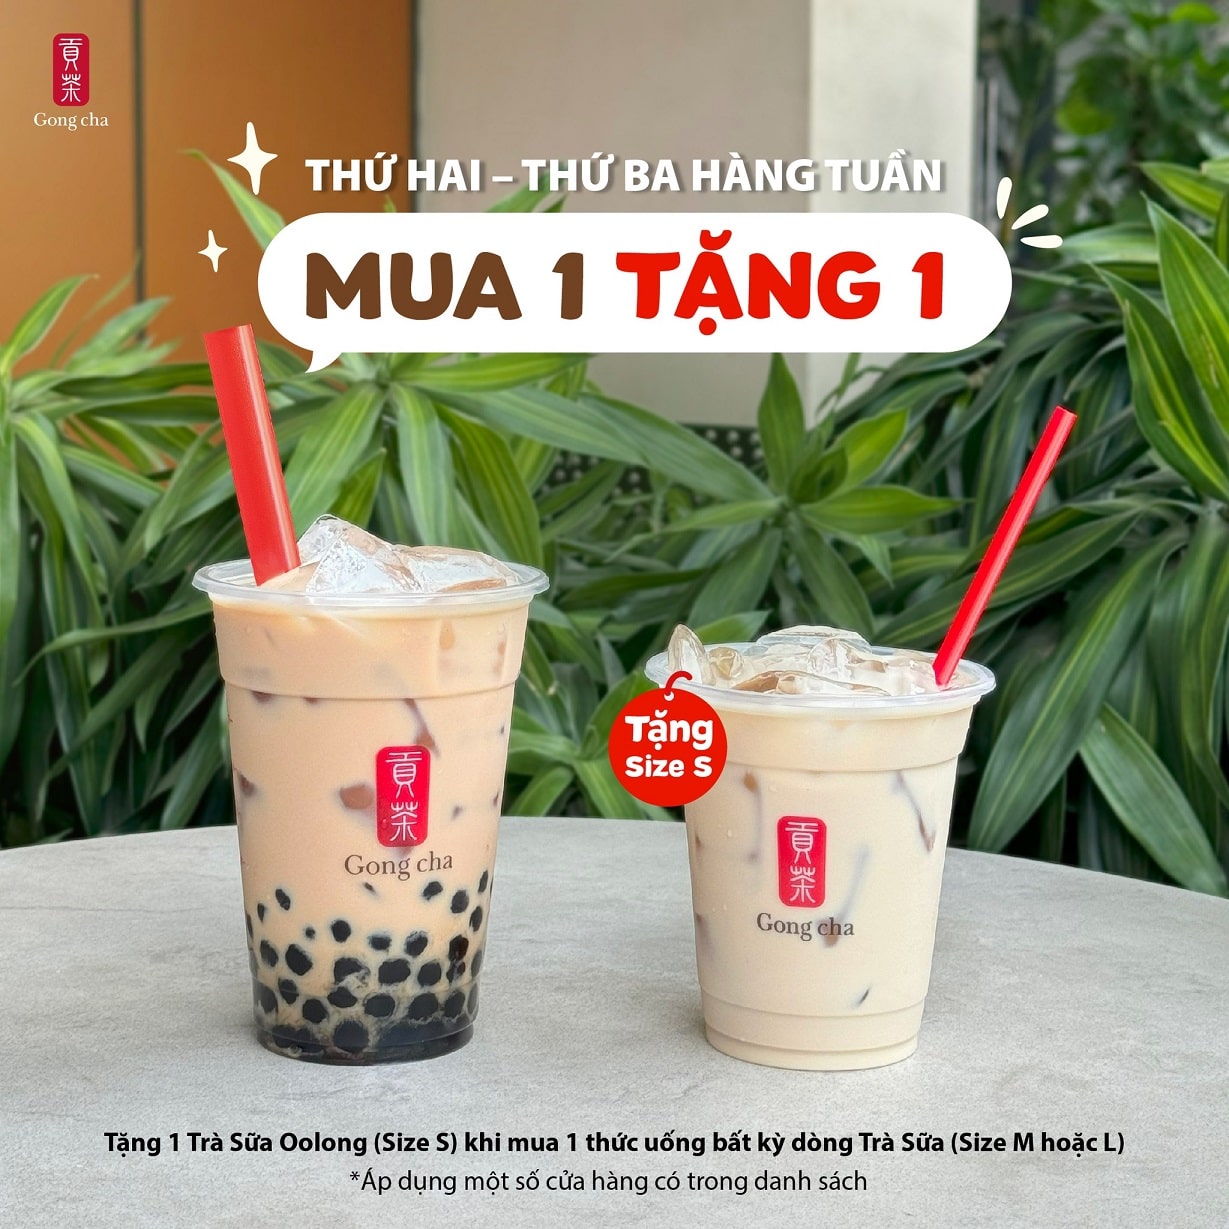 Gong Cha Exclusive Family Treat: Buy 1 Get 1 Free on Mondays and Tuesdays in April